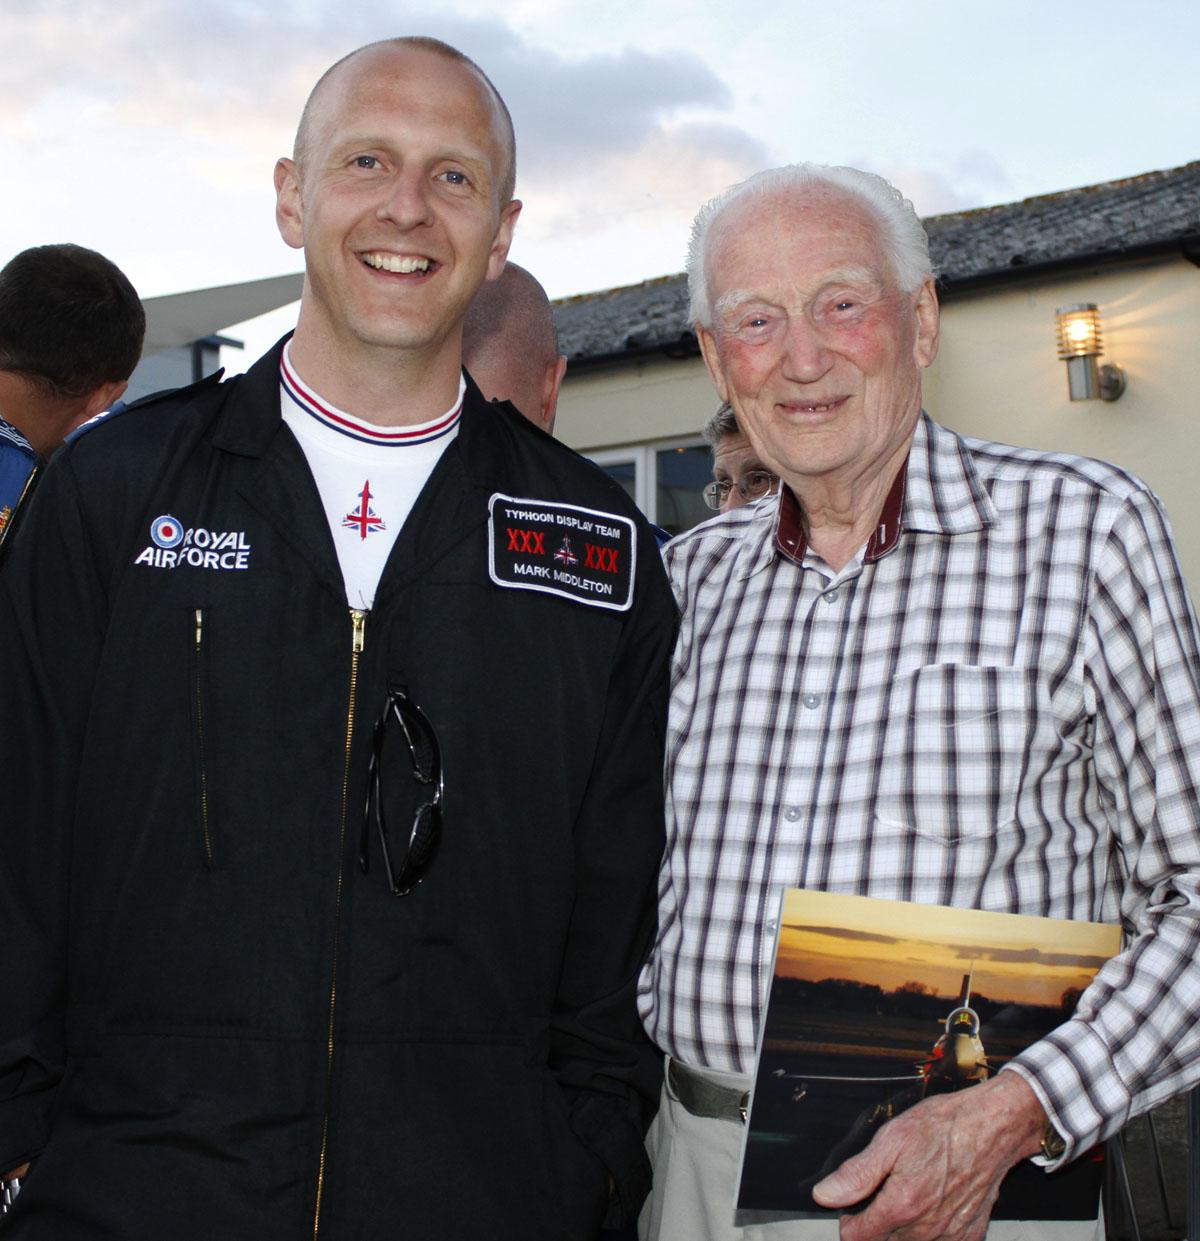 Bournemouth Red Arrows Association Barbecue at Bournemouth Flying Club ... Typhoon Display Team engineer Mark Middleton with Gerald Humphries.